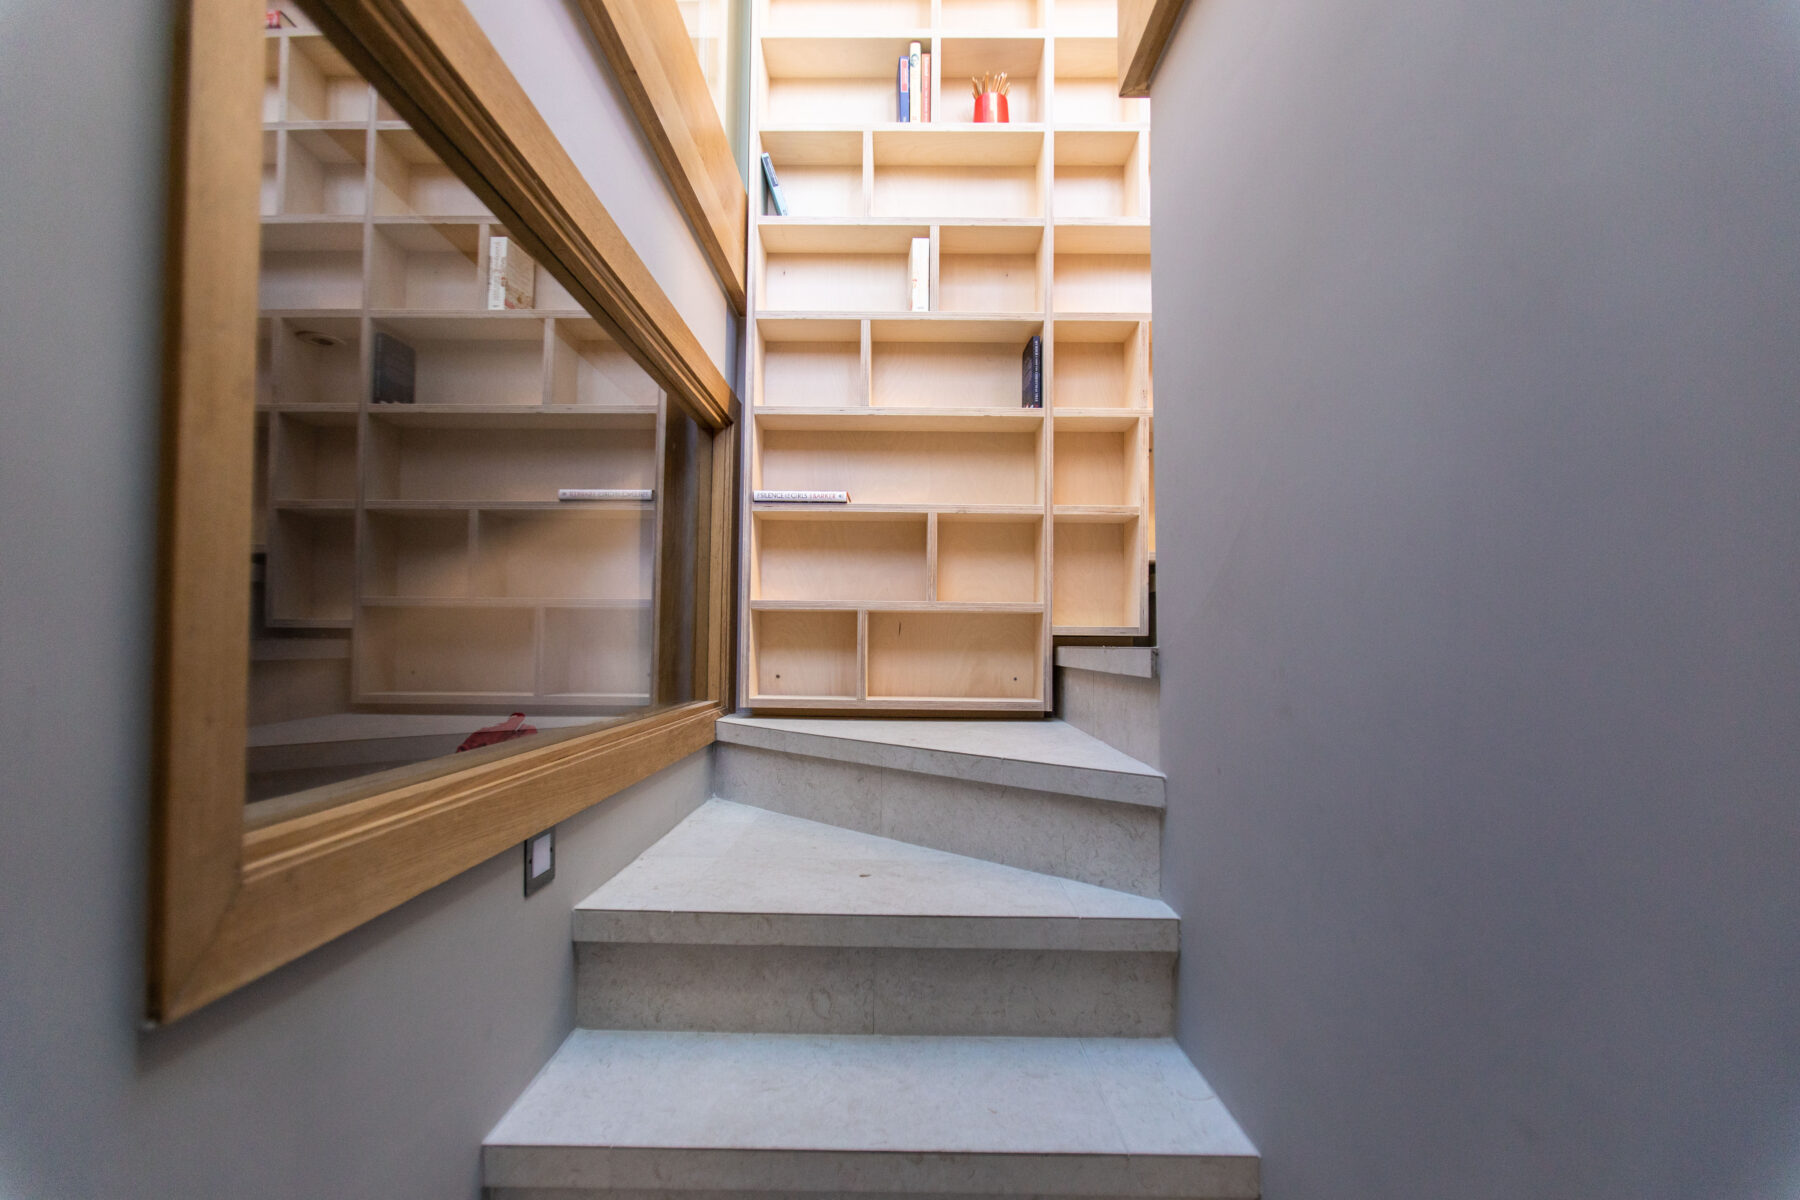 Library bookcase on stairway